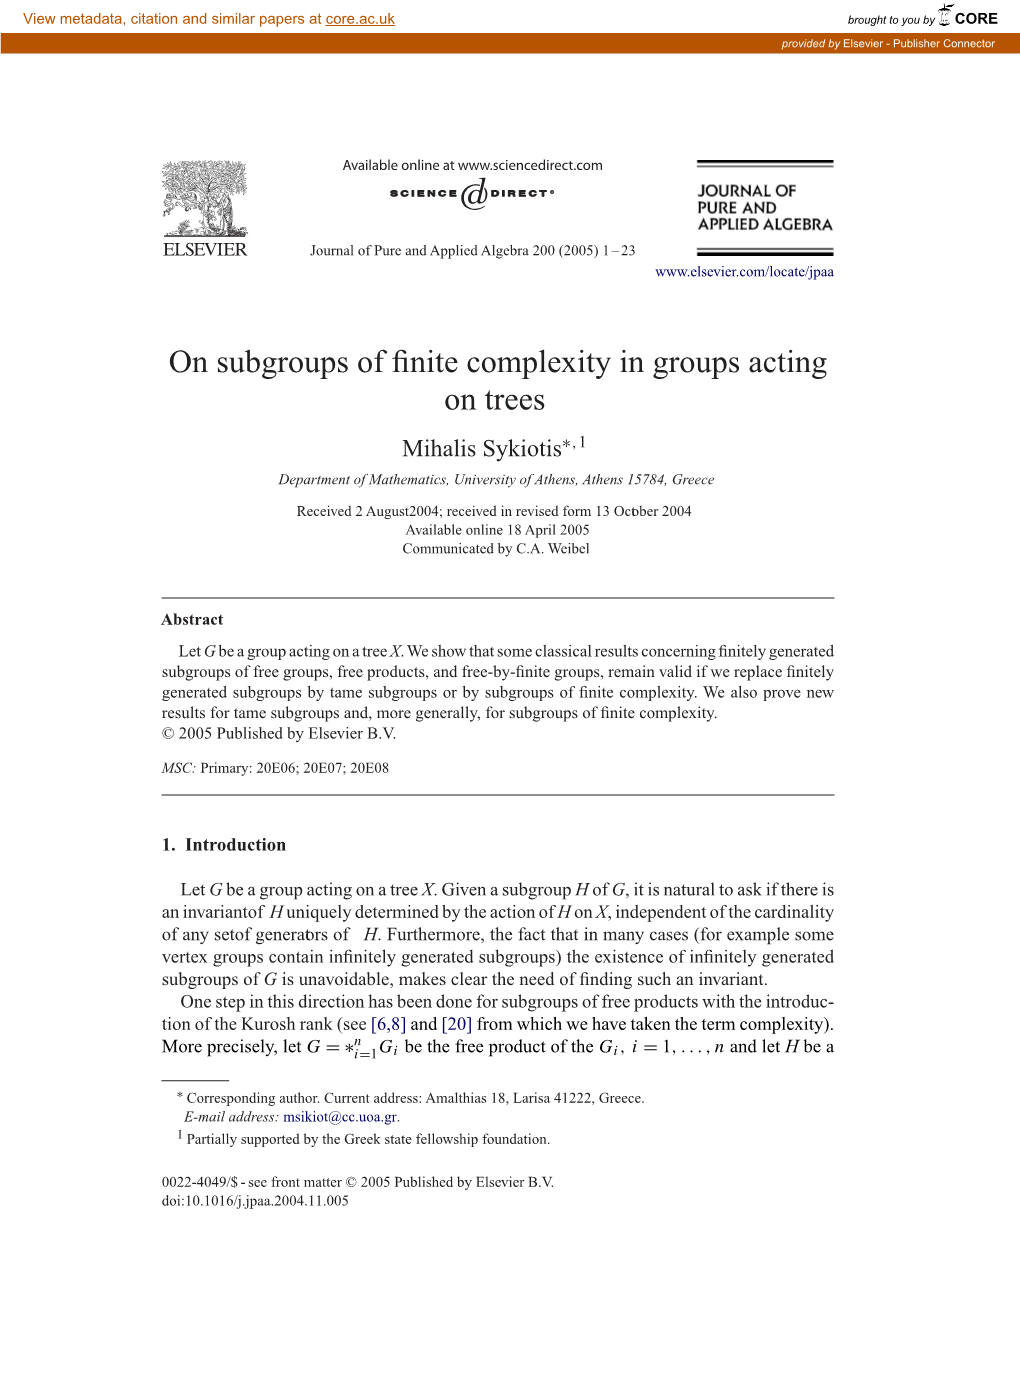 On Subgroups of Finite Complexity in Groups Acting on Trees